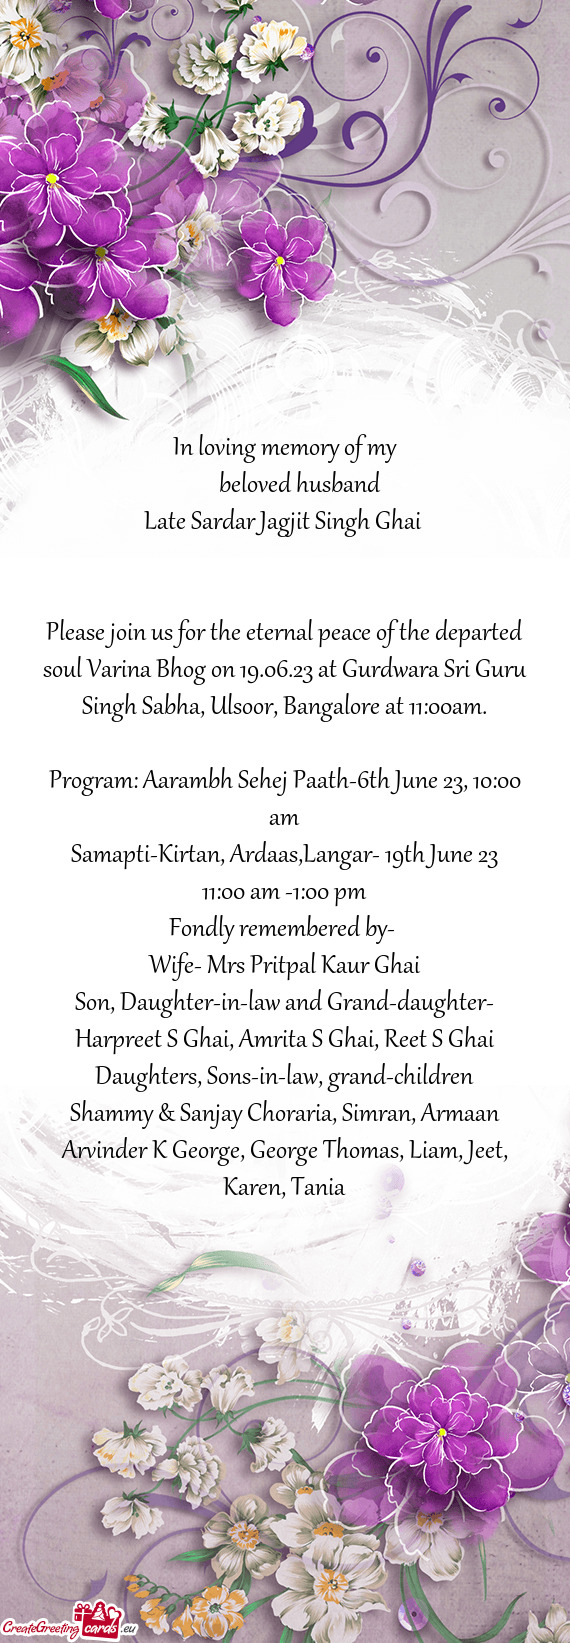 Please join us for the eternal peace of the departed soul Varina Bhog on 19.06.23 at Gurdwara Sri Gu